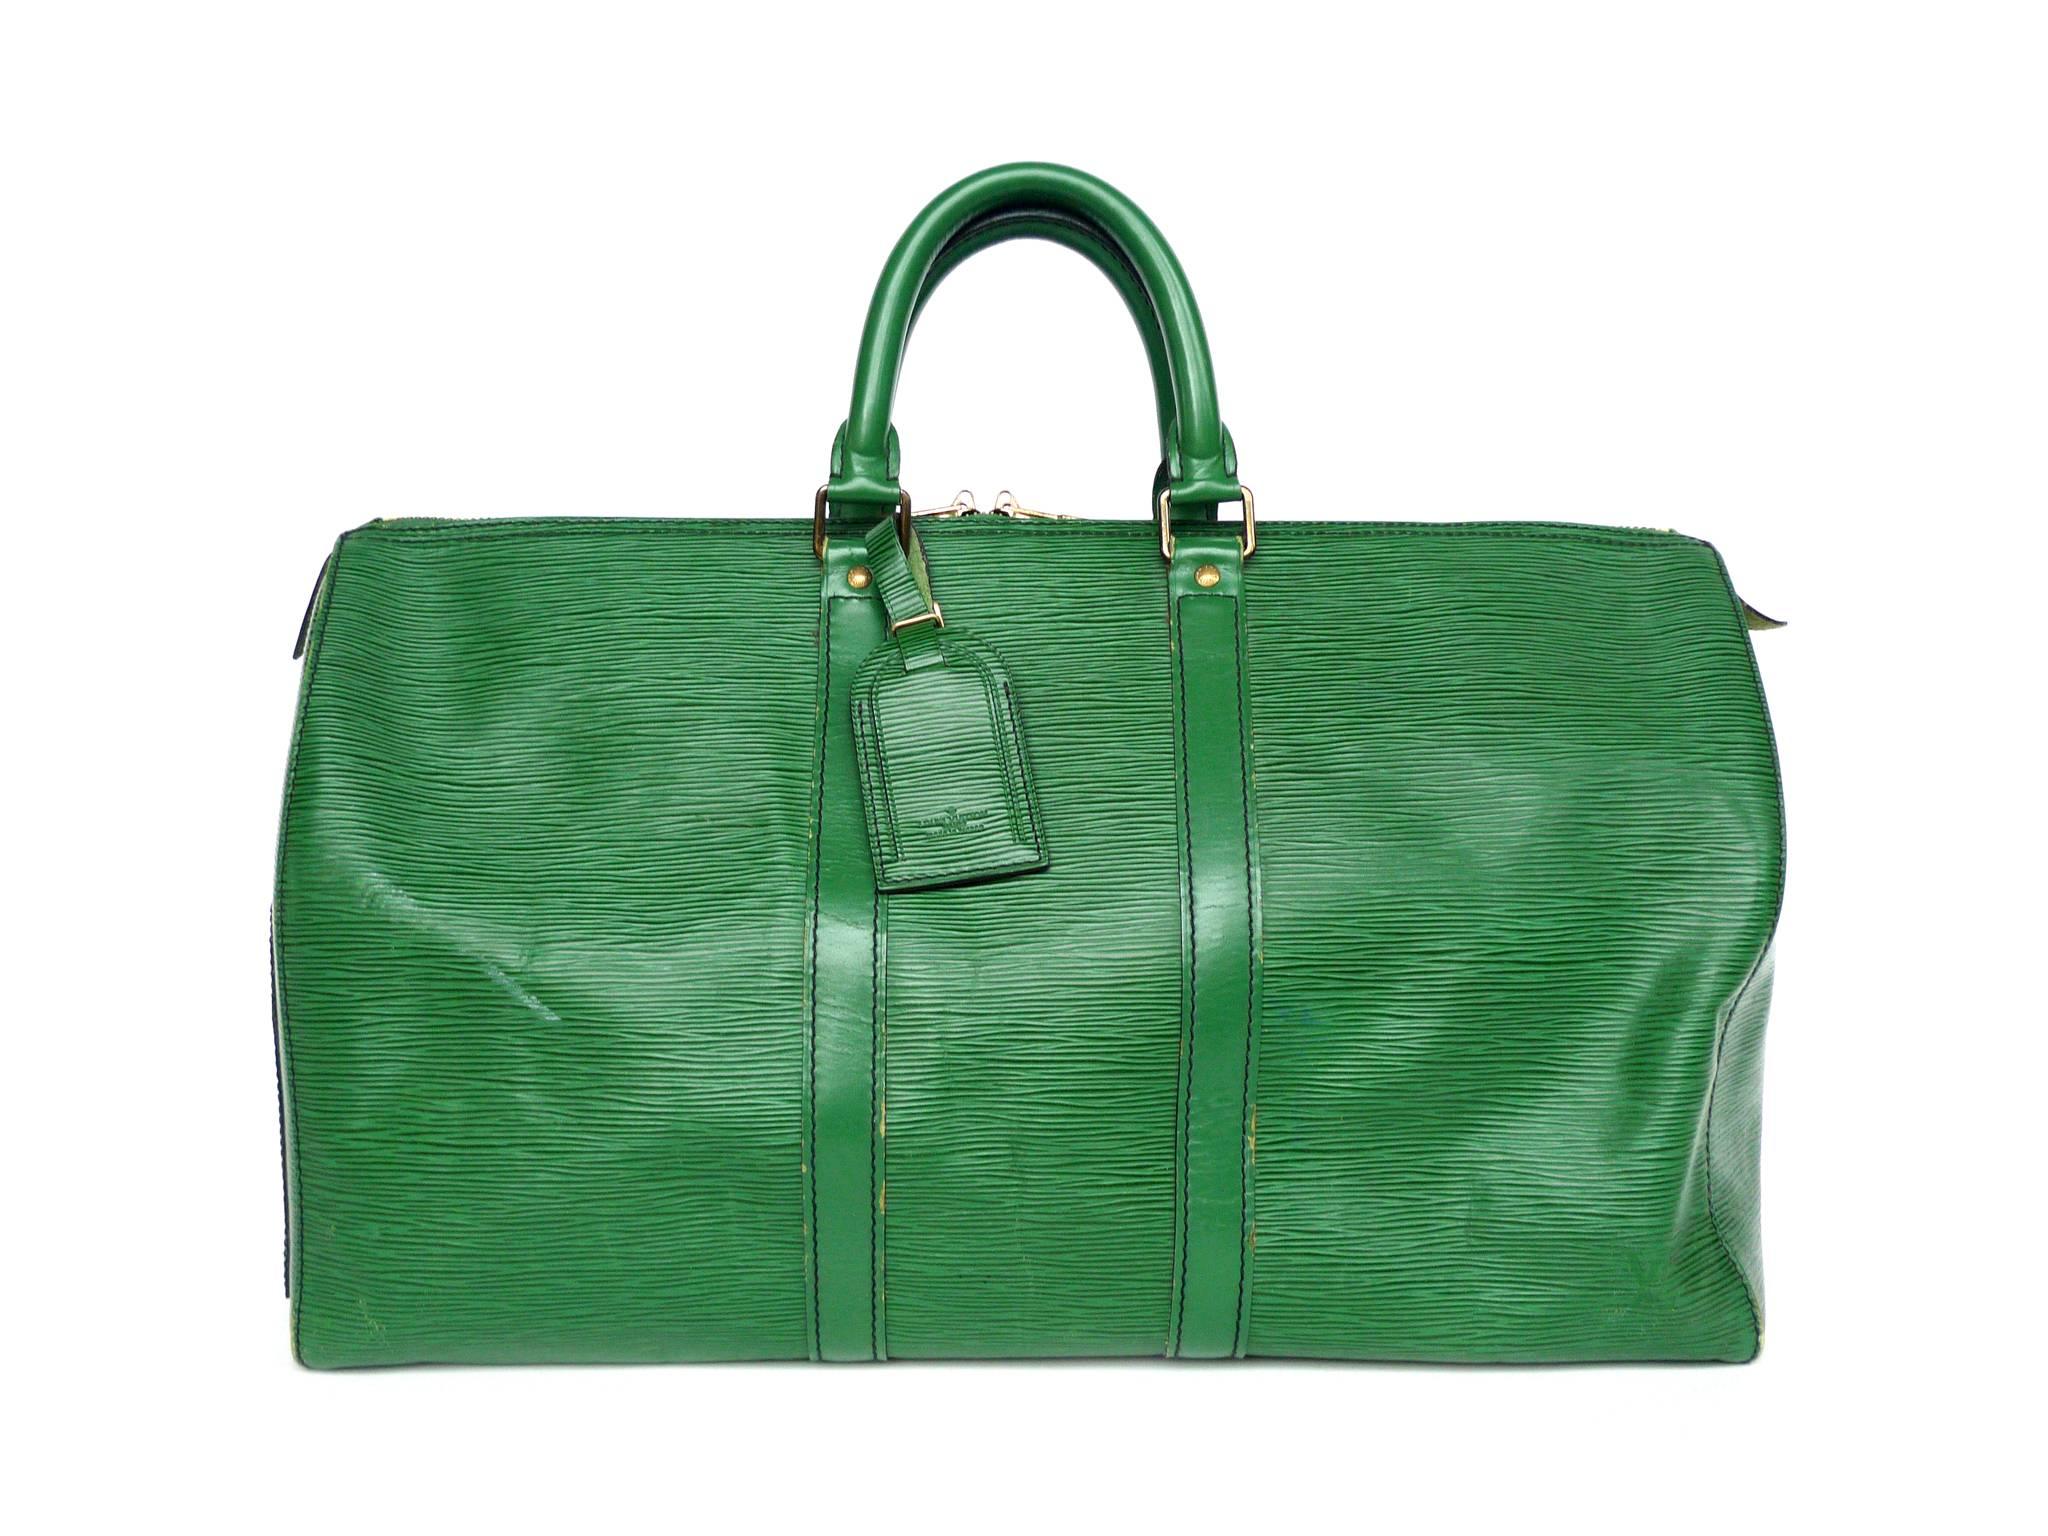 This Louis Vuitton Keepall 45 travel bag is crafted from durable, soft Epi leather dyed in an emerald green hue. Gold-toned brass hardware beautifully complement the sleek shape. The bag's interior is lined in a green suede fabric. Other functional